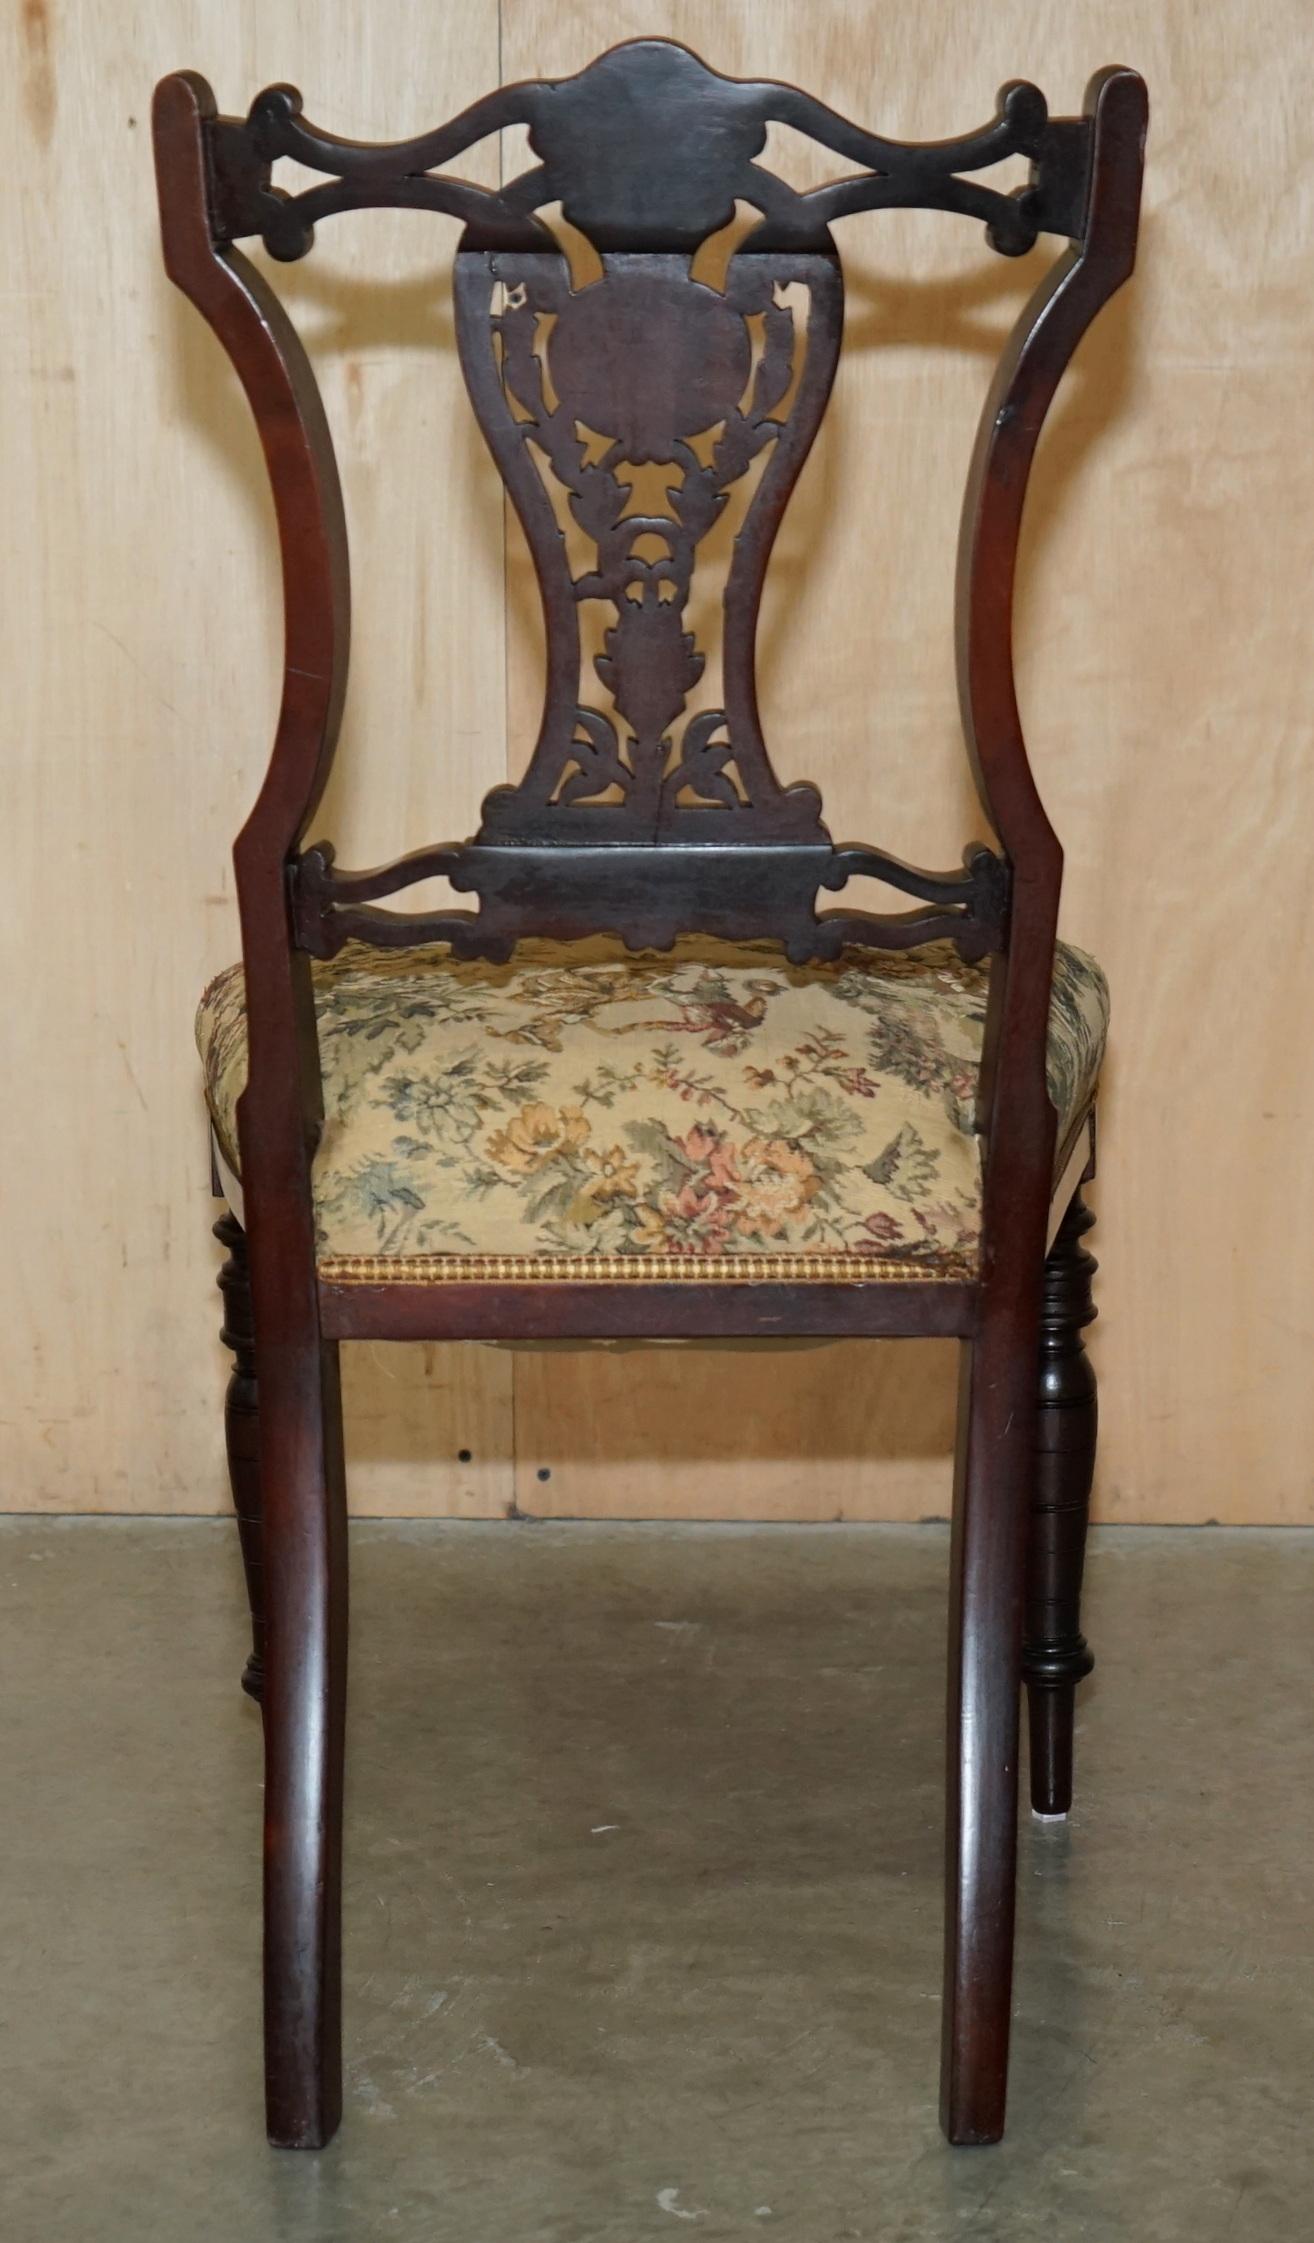 PAiR OF ANTIQUE VICTORIAN HARDWOOD SALON CHAIRS WITH STUNNING INLAID BACK PANELS For Sale 4